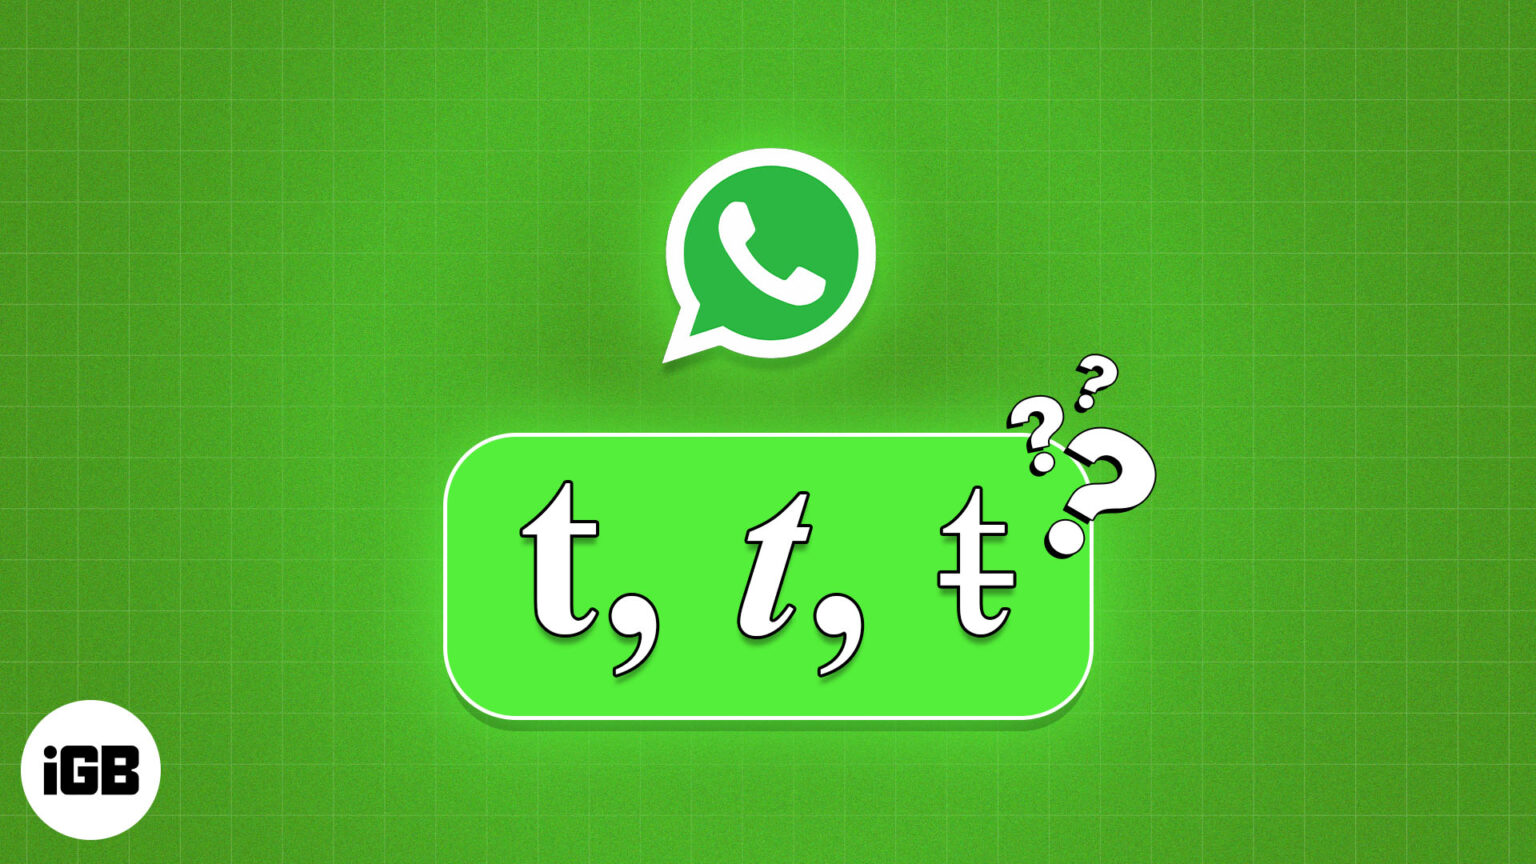 How to type Bold, Italic, Strikethrough, and more in WhatsApp on iPhone